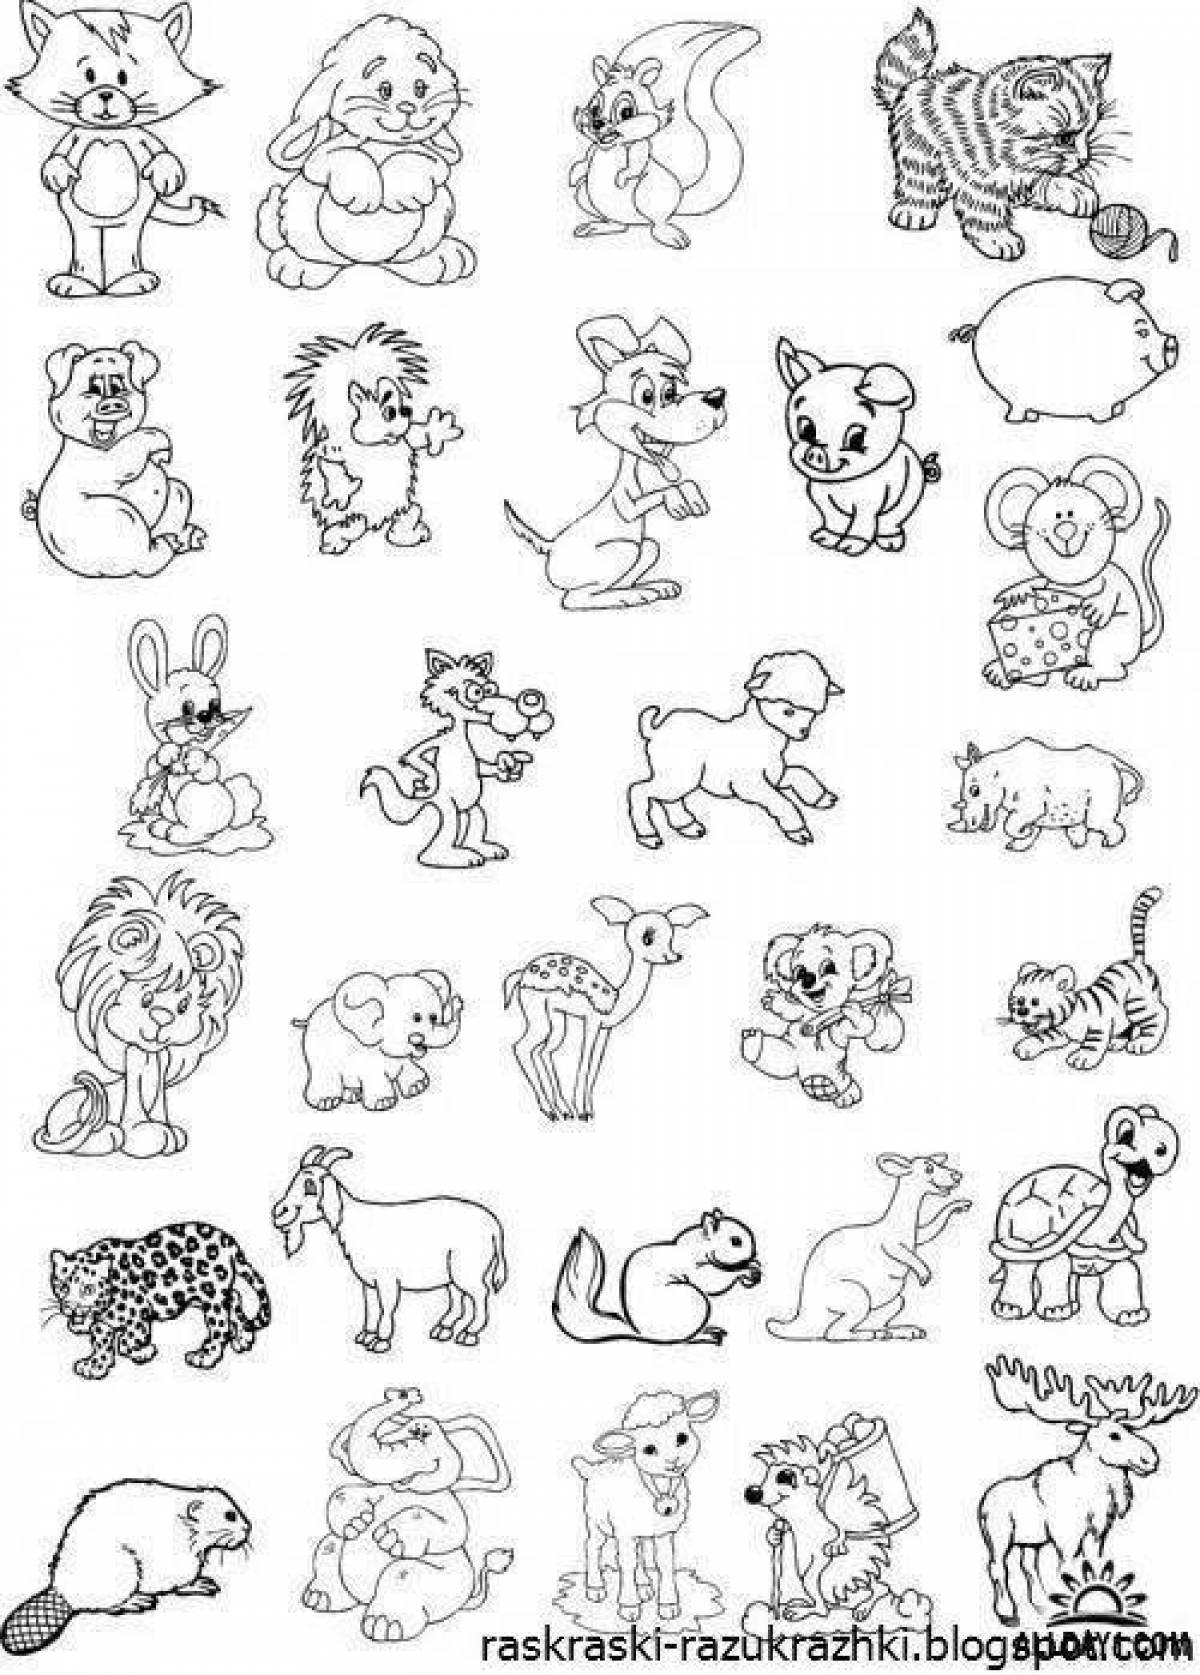 Many small coloring pages on one sheet #2